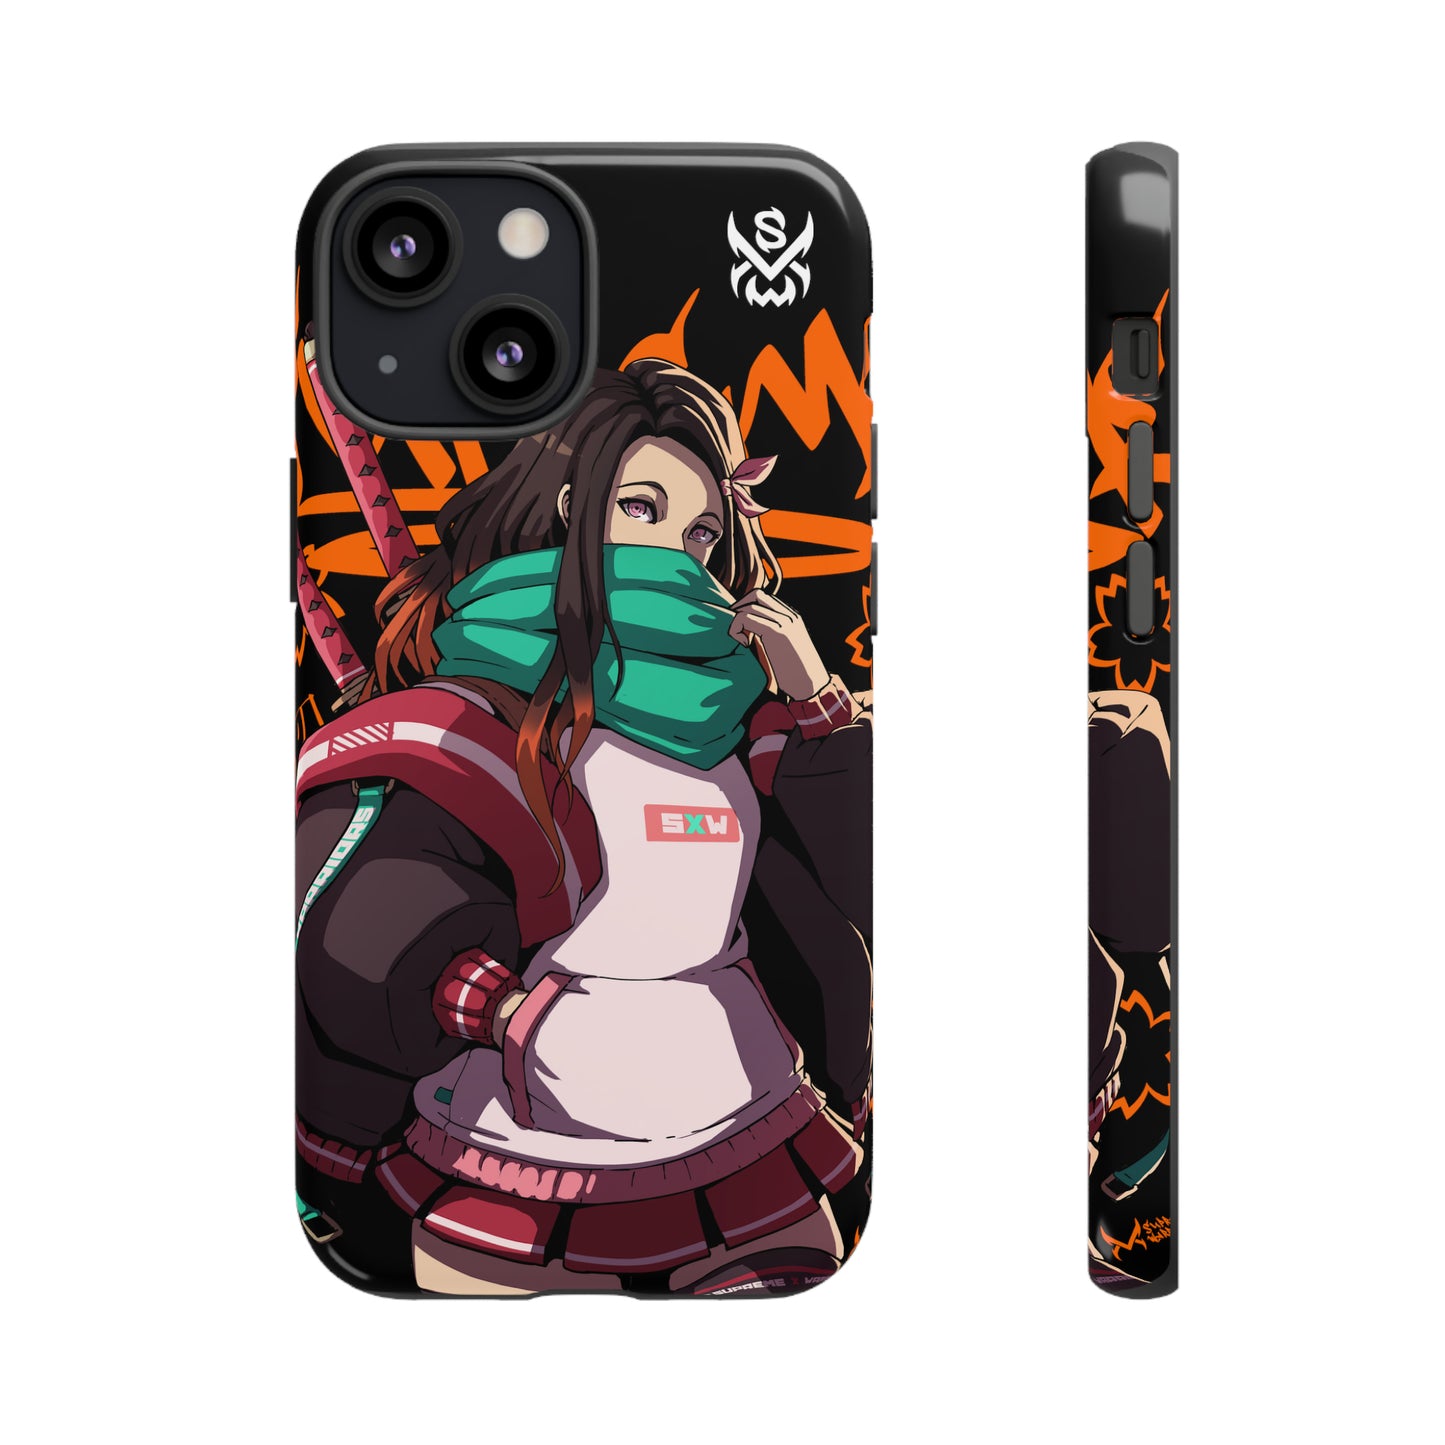 Yuesuo / iPhone Case - LIMITED